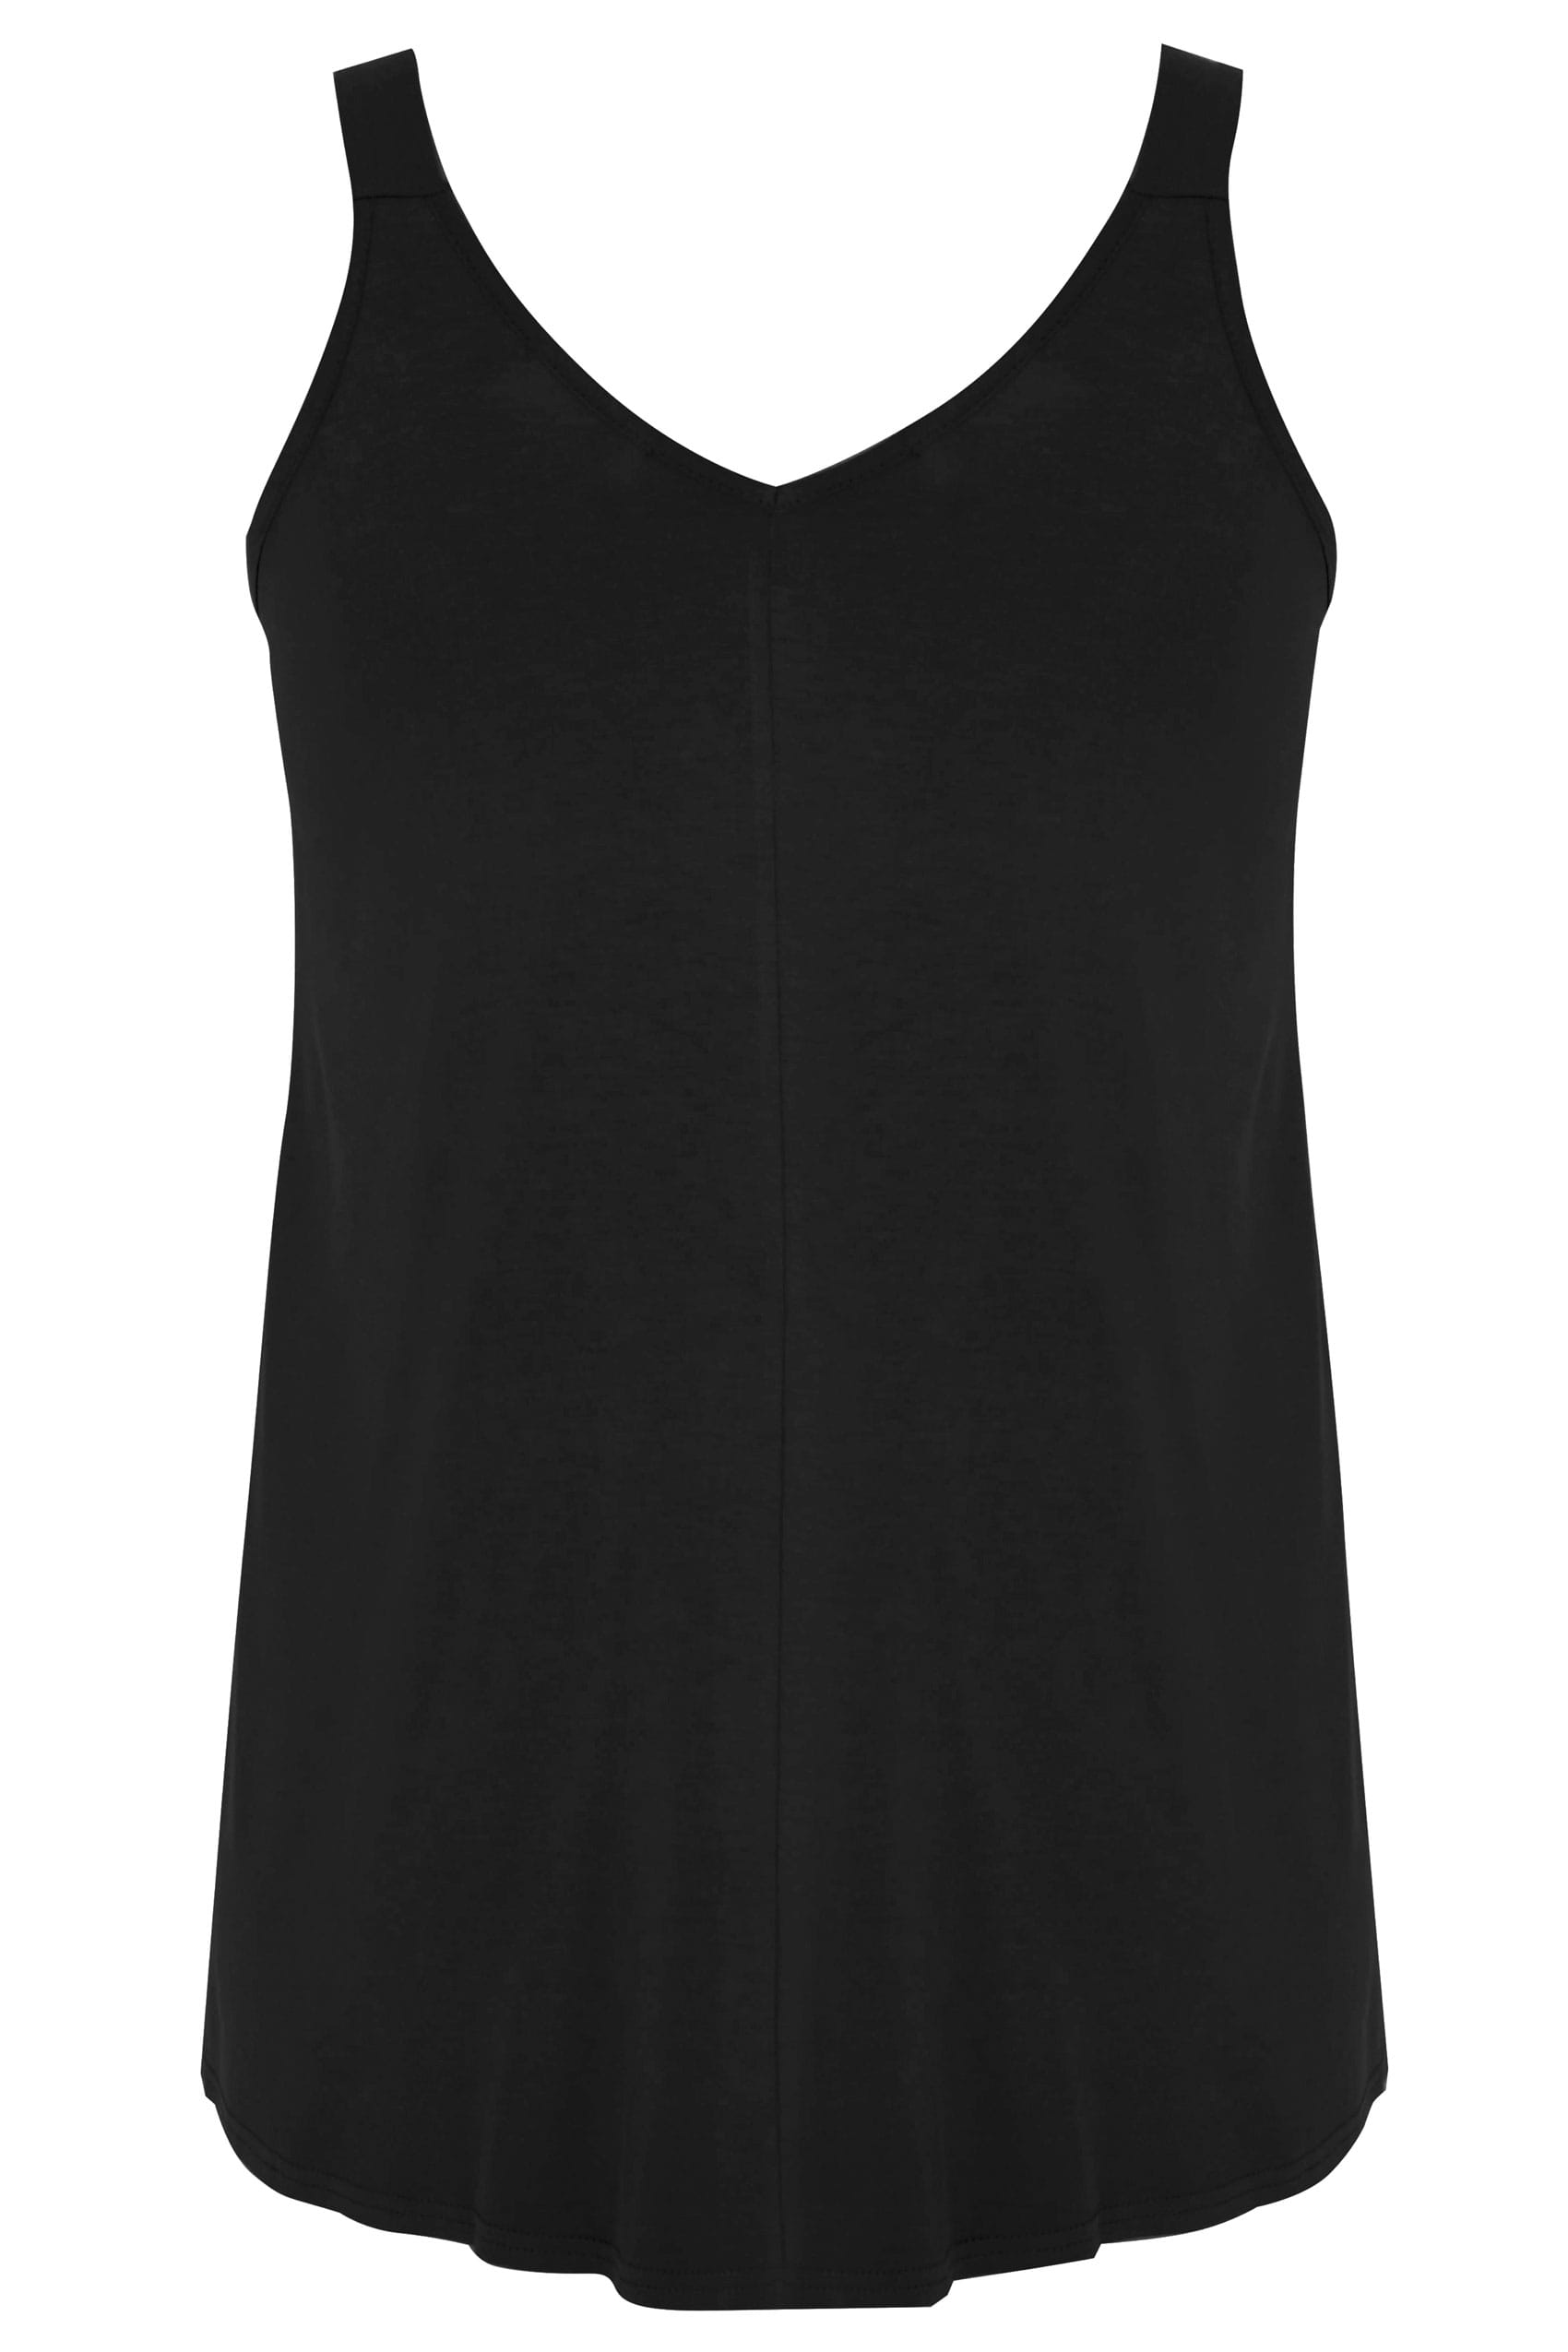 Black Jersey Vest Top With D Ring Fastenings, plus size 16 to 36 ...